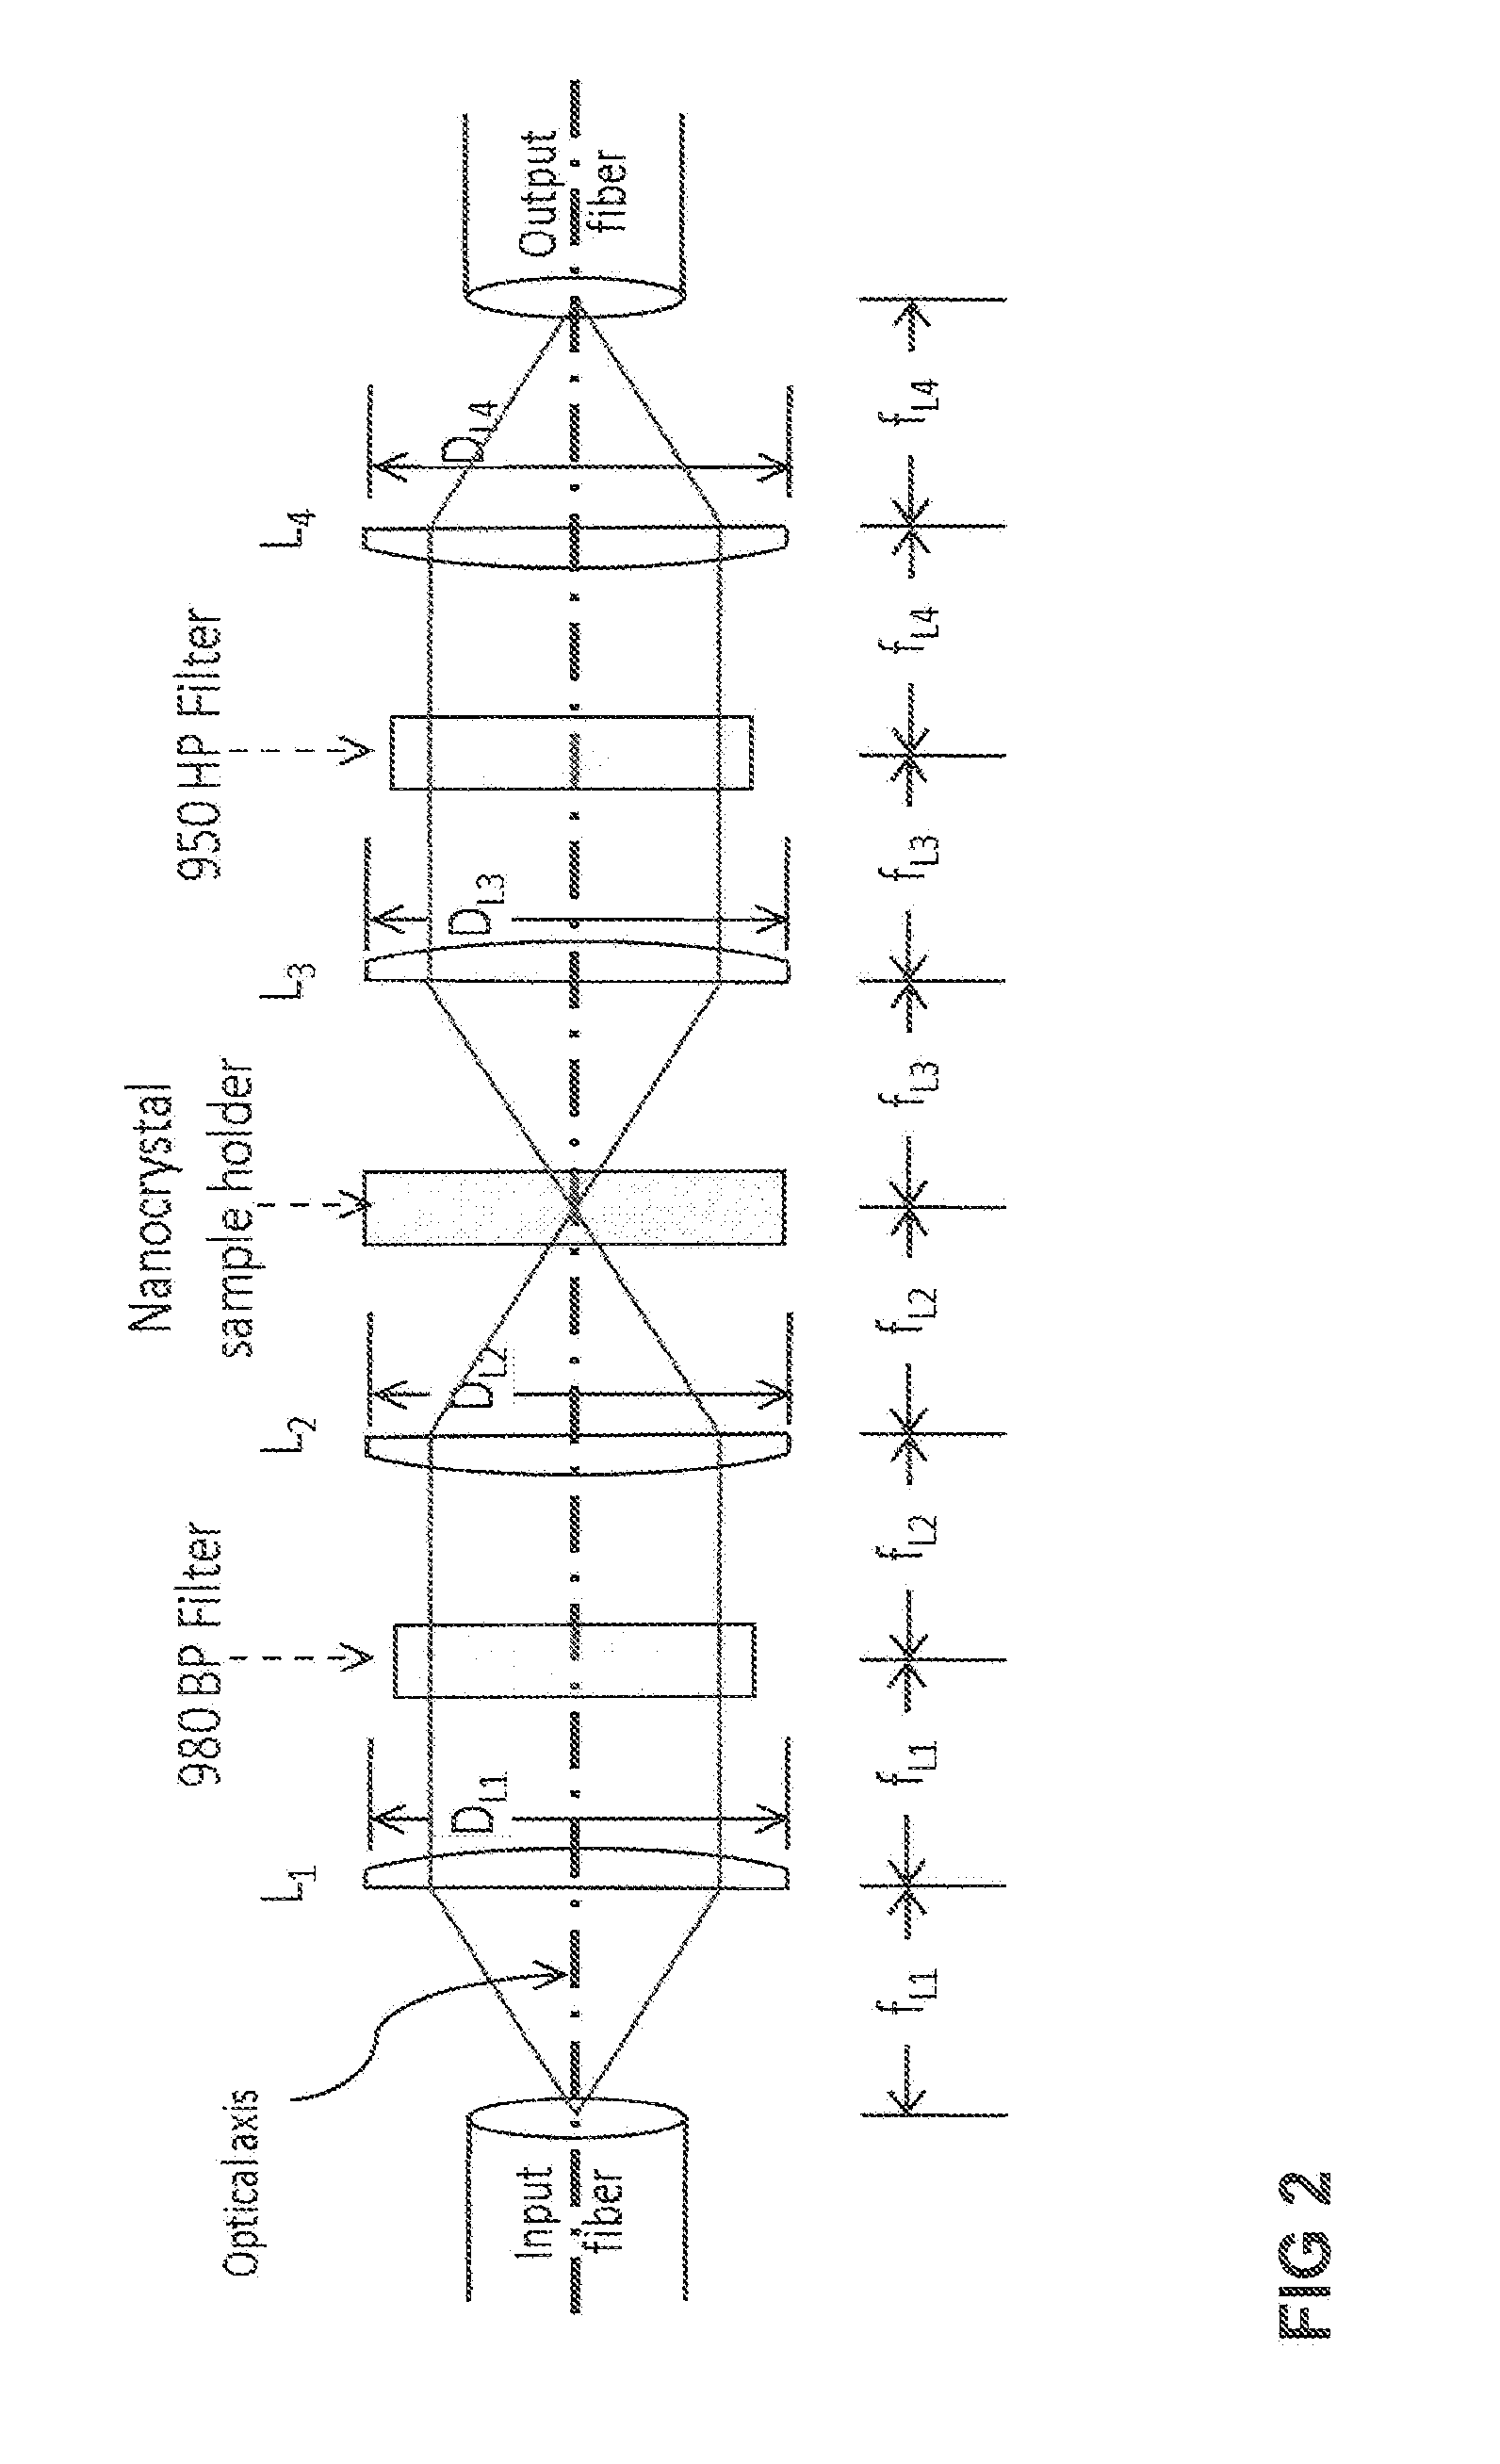 Optical system enabling low power excitation and high sensitivity detection of near infrared to visible upconversion phoshors